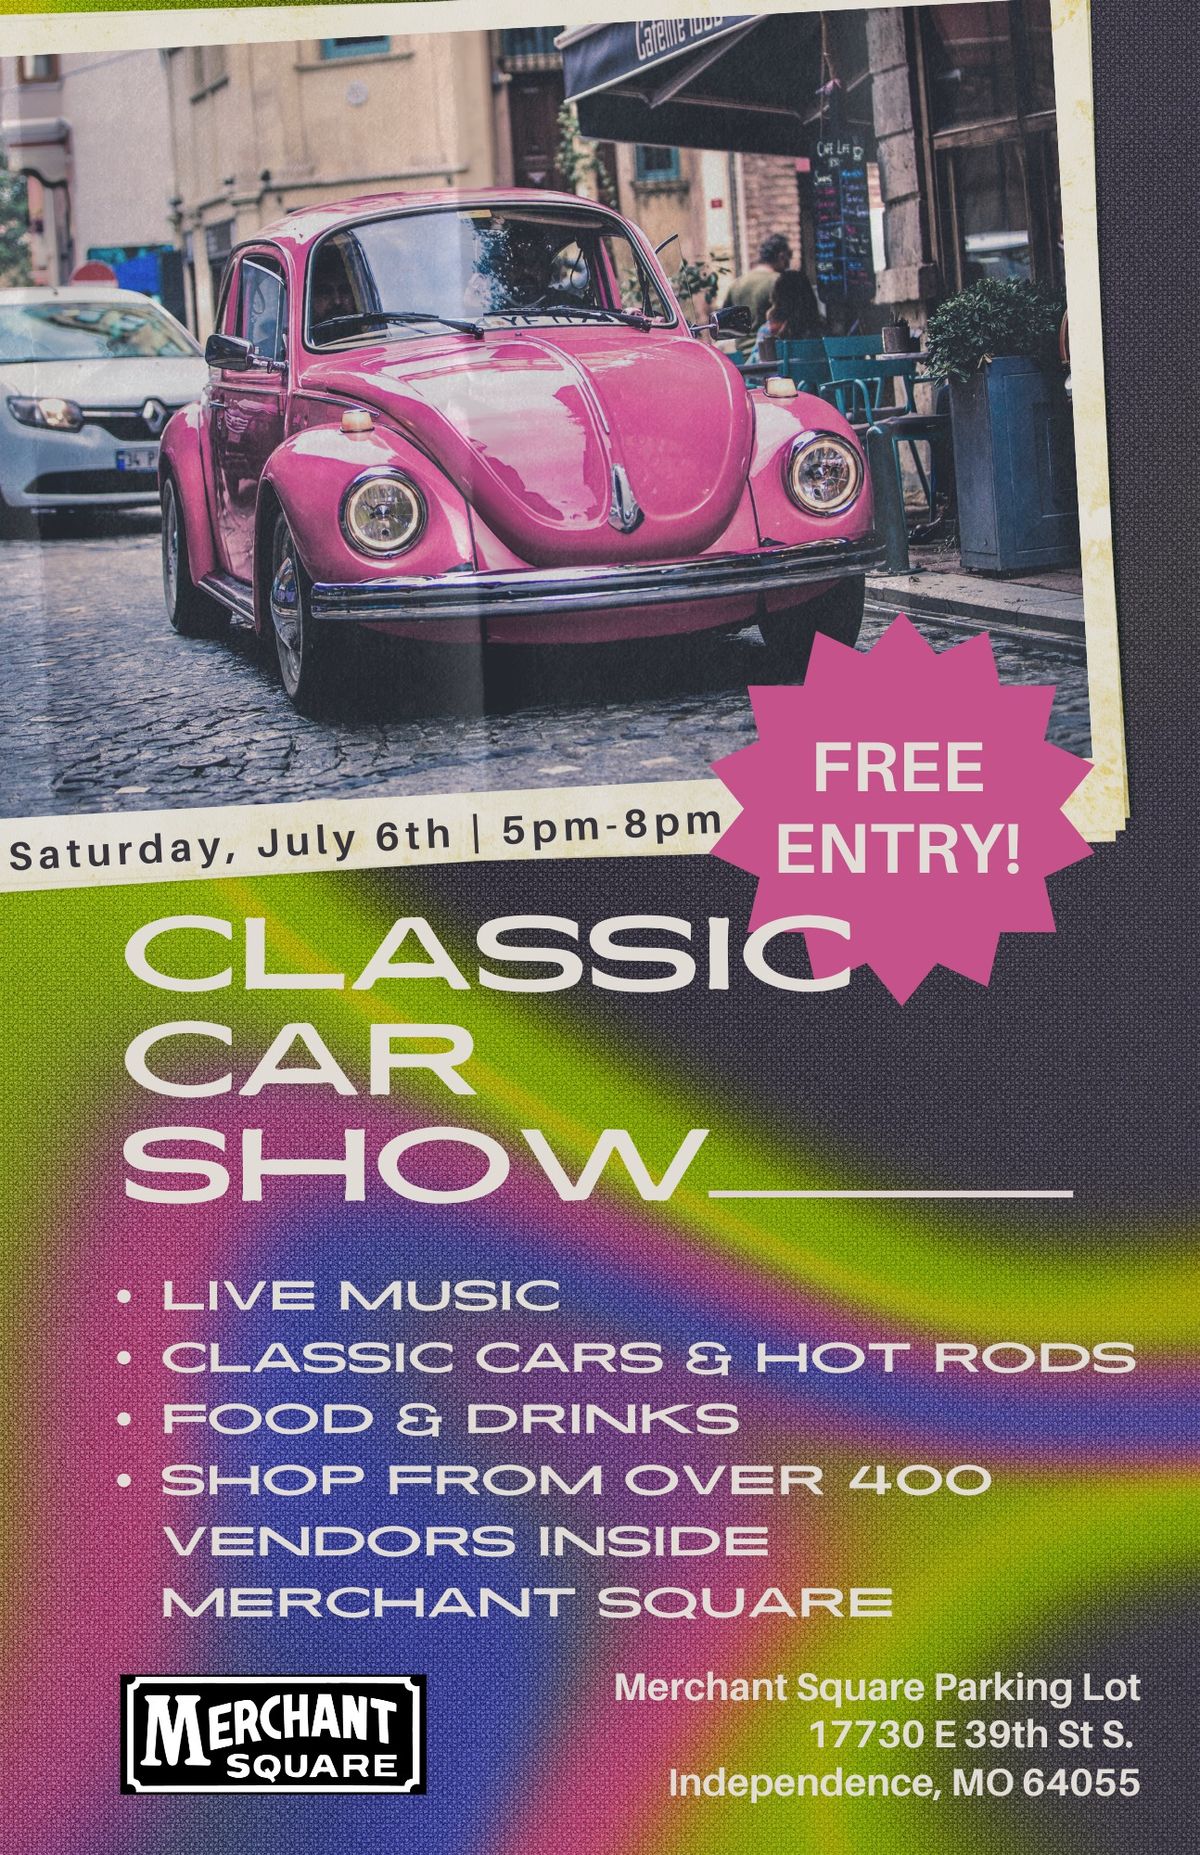 July Car Show & Live Music at Merchant Square - Free Parking and Admission